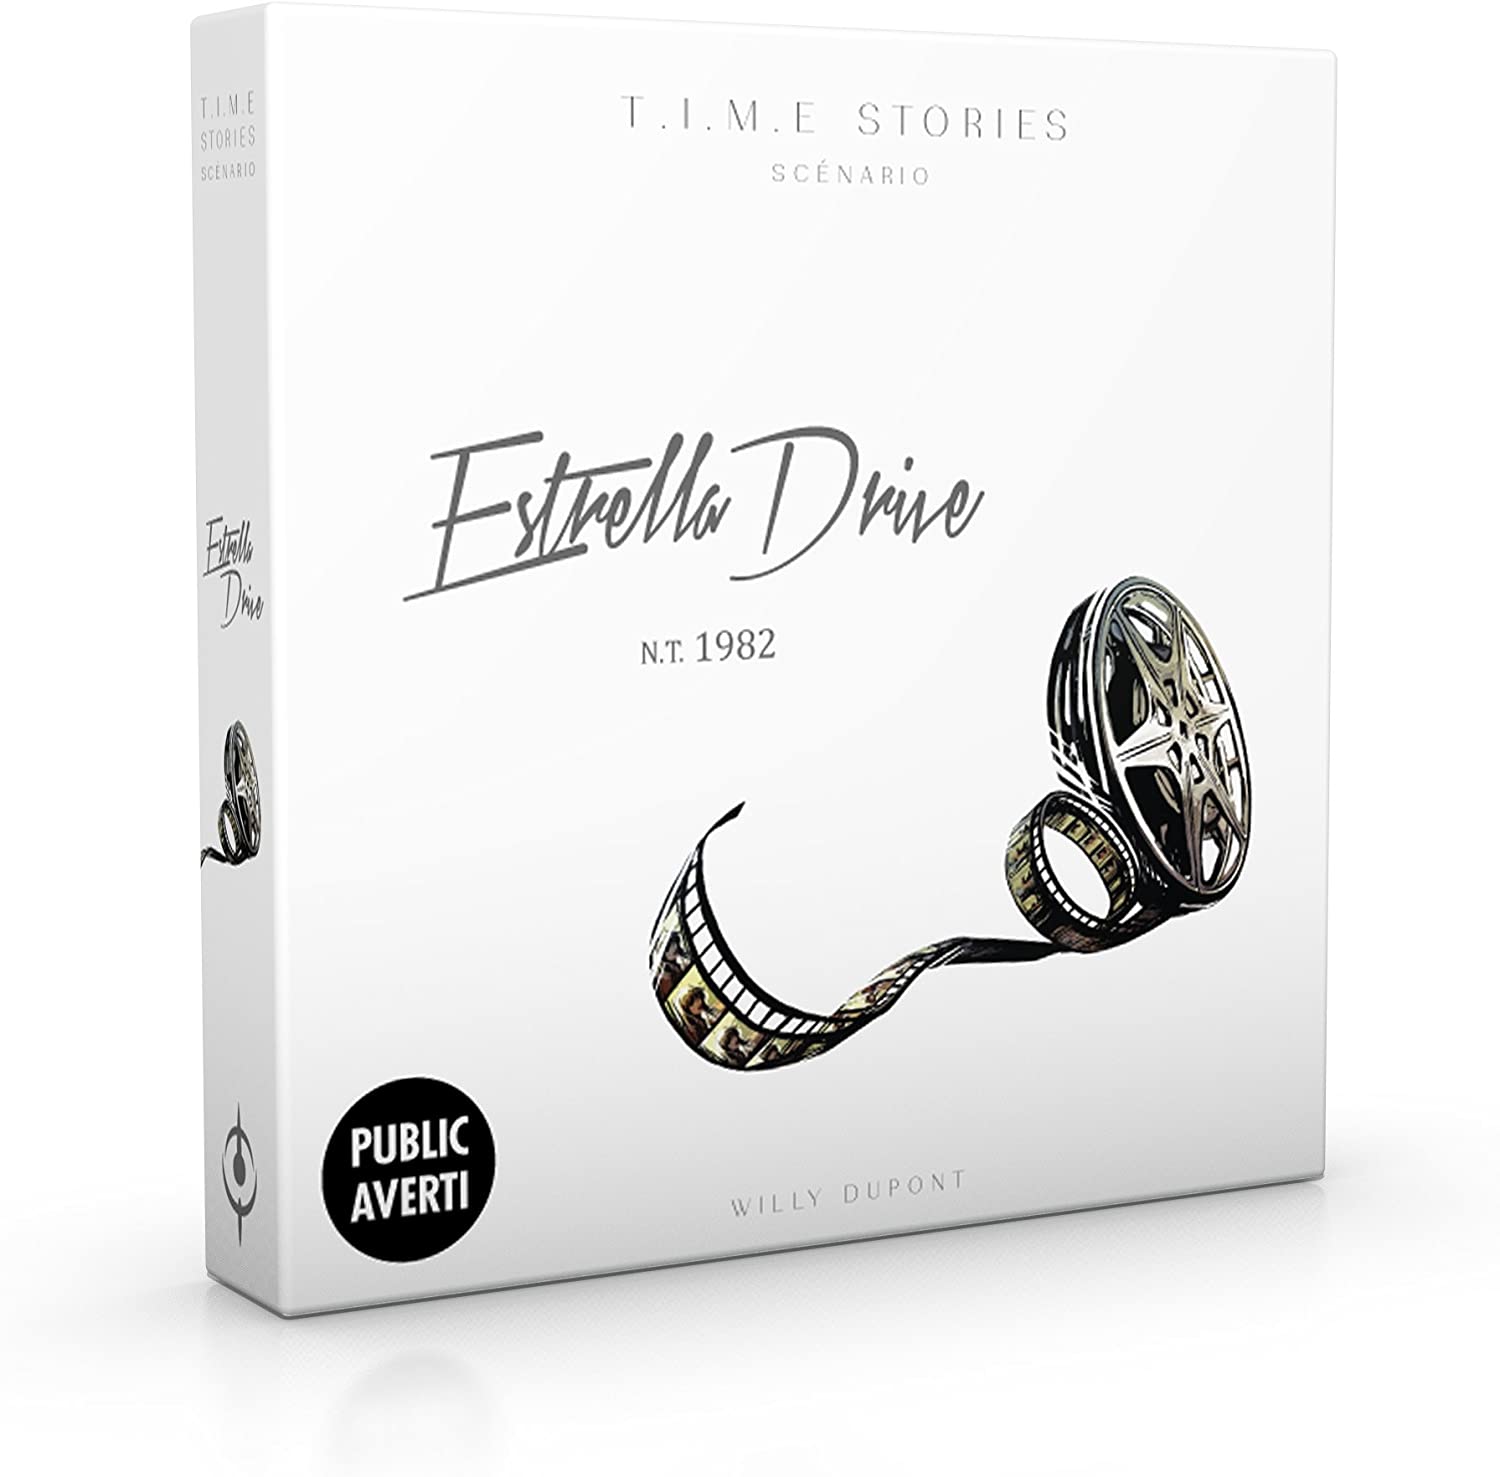 (BSG Certified USED) TIME Stories - Estrella Drive